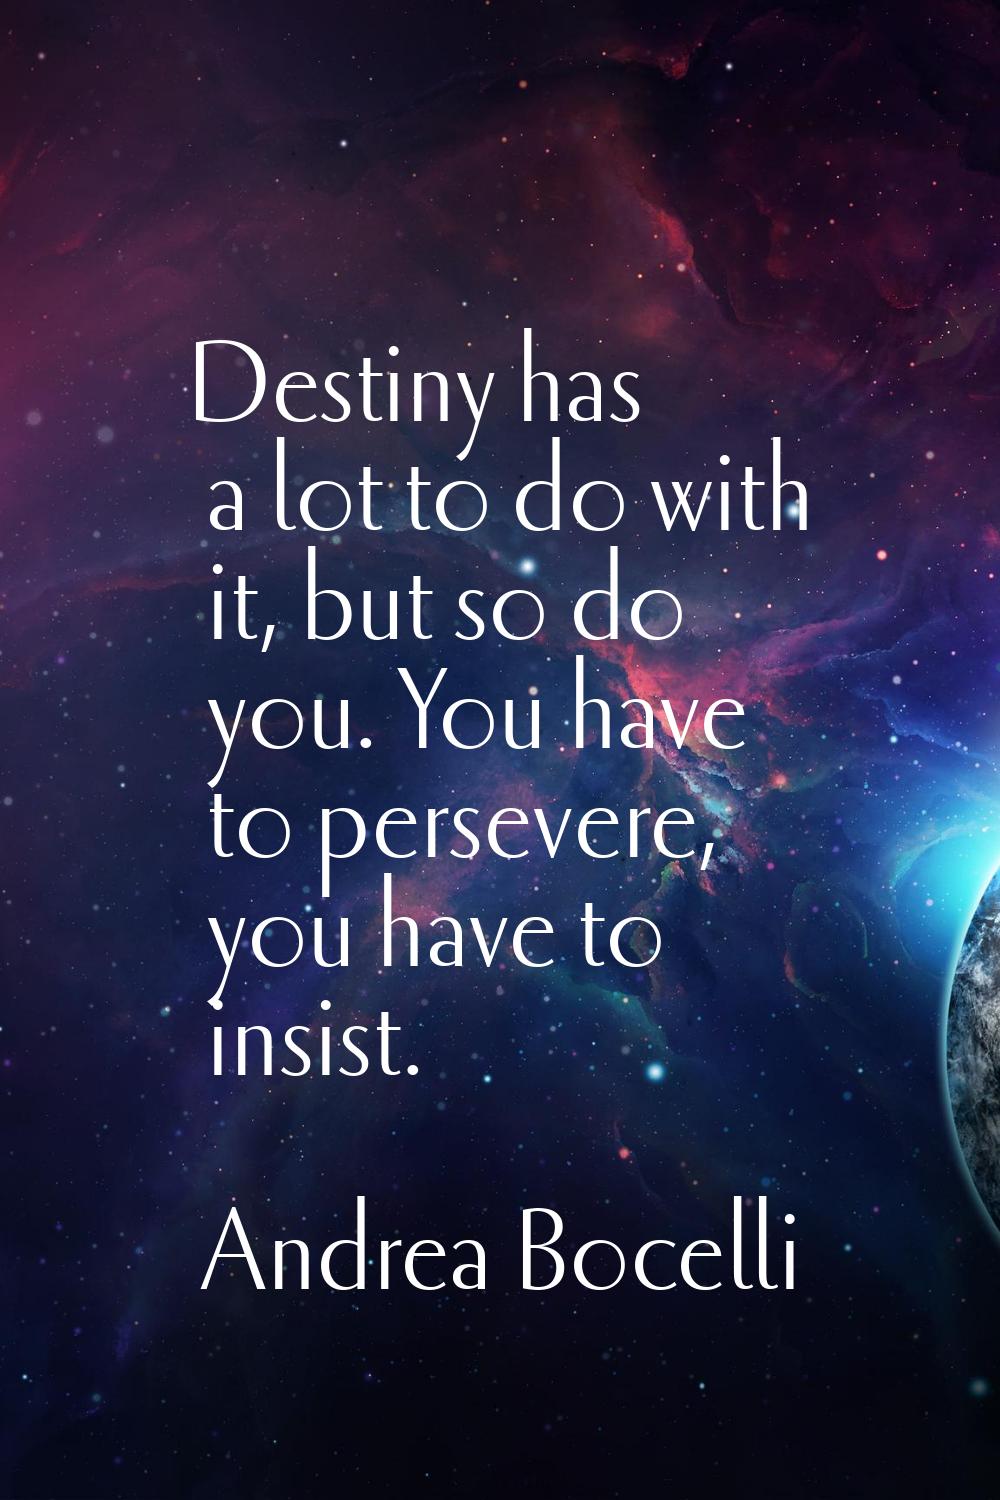 Destiny has a lot to do with it, but so do you. You have to persevere, you have to insist.